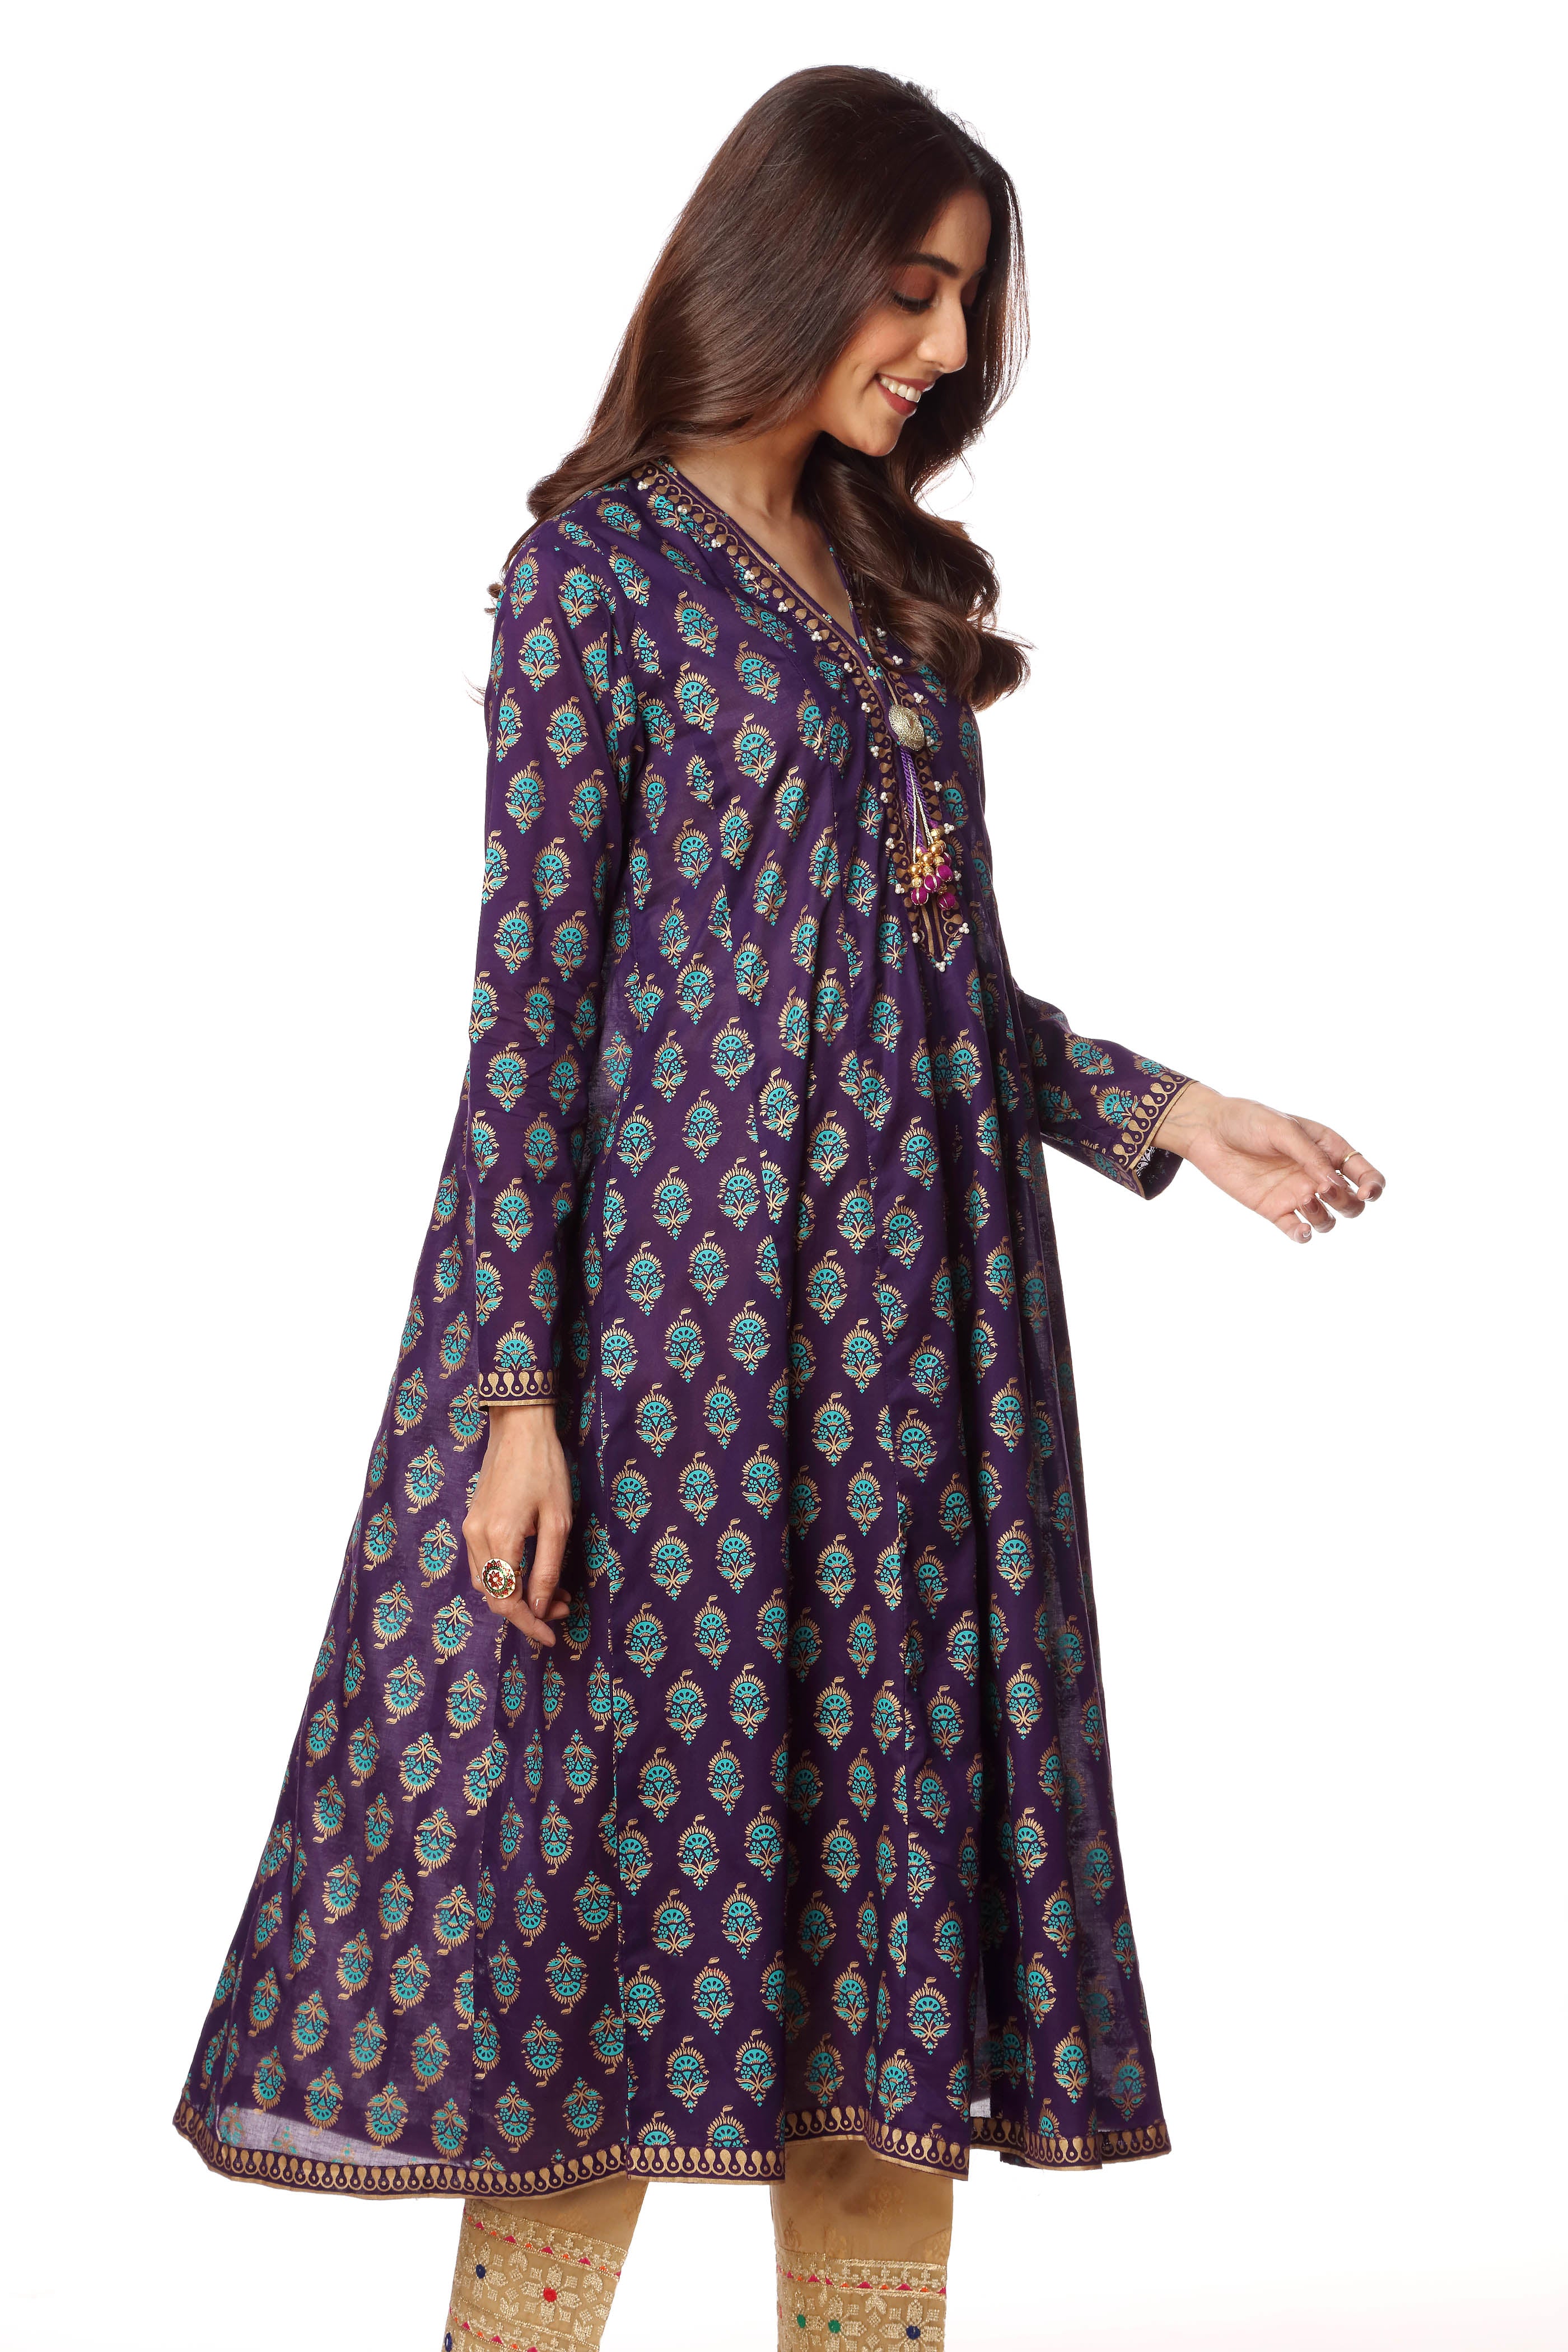 Peacock Frock in Purple coloured Printed Lawn fabric 2